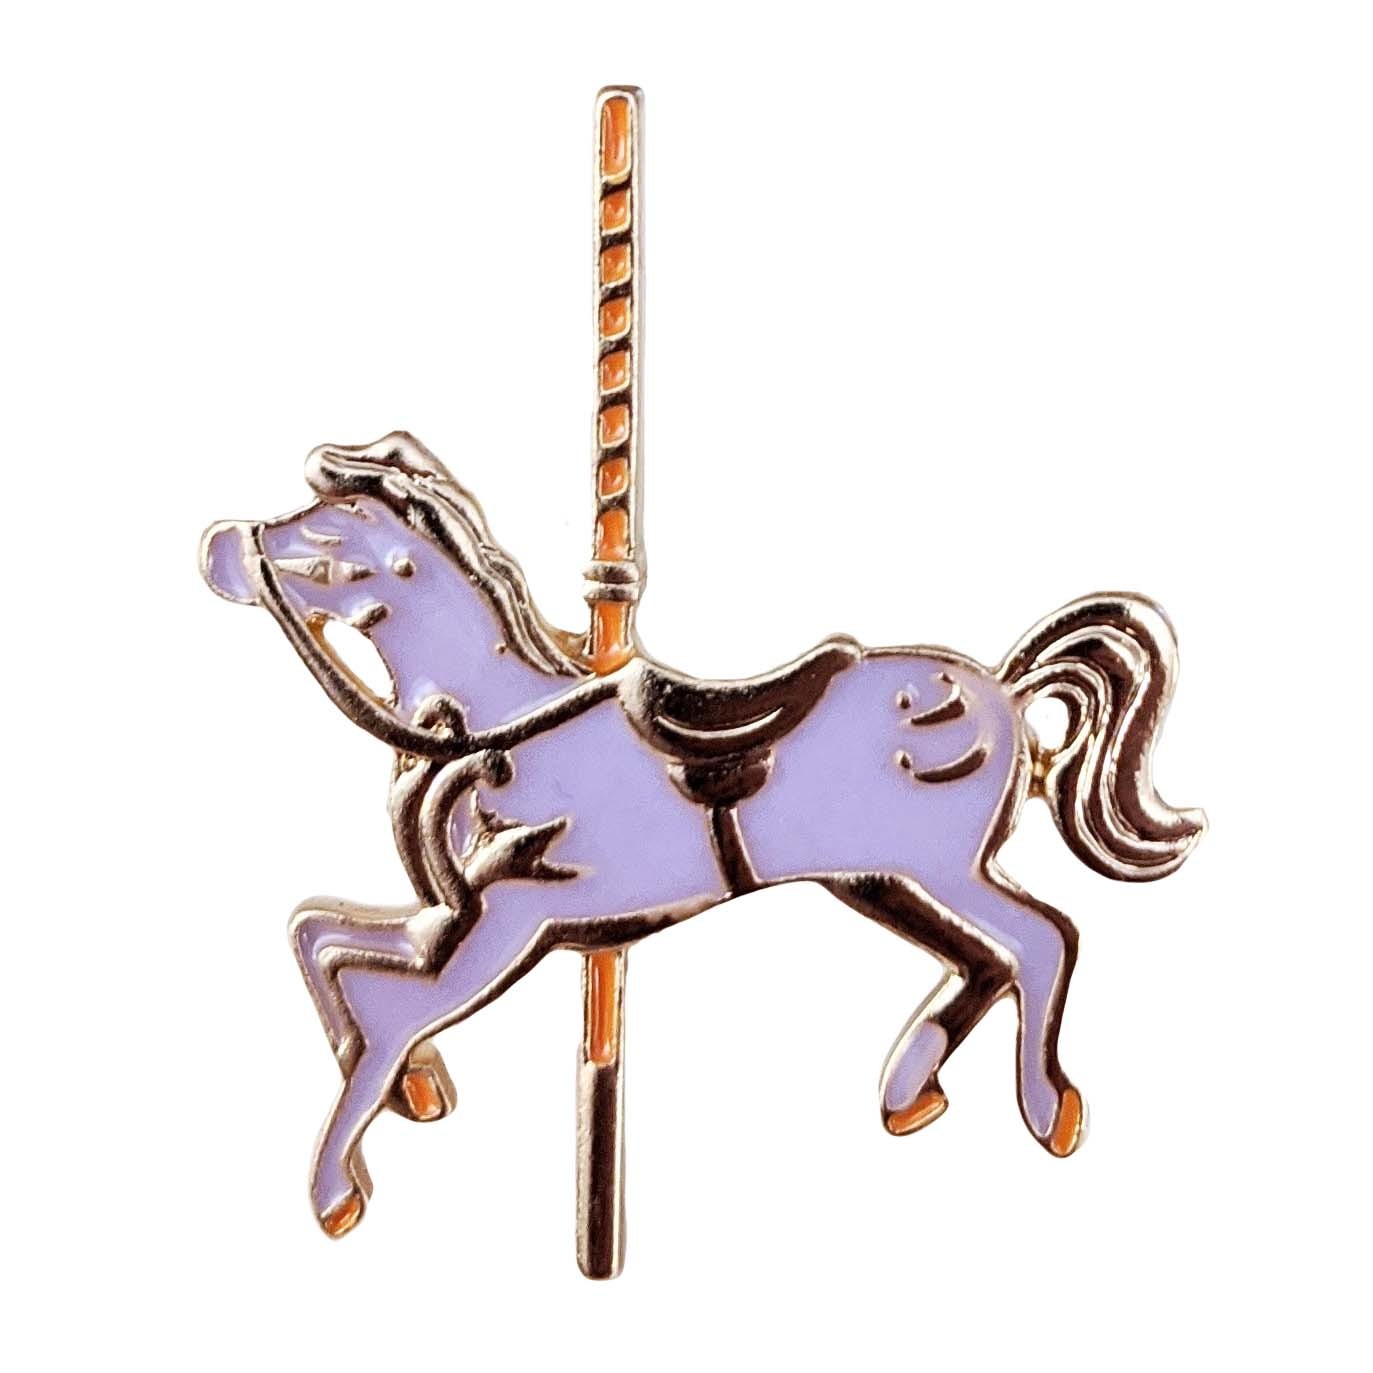 Primary image for Mary Poppins Disney Lapel Pin: Carousel Horse